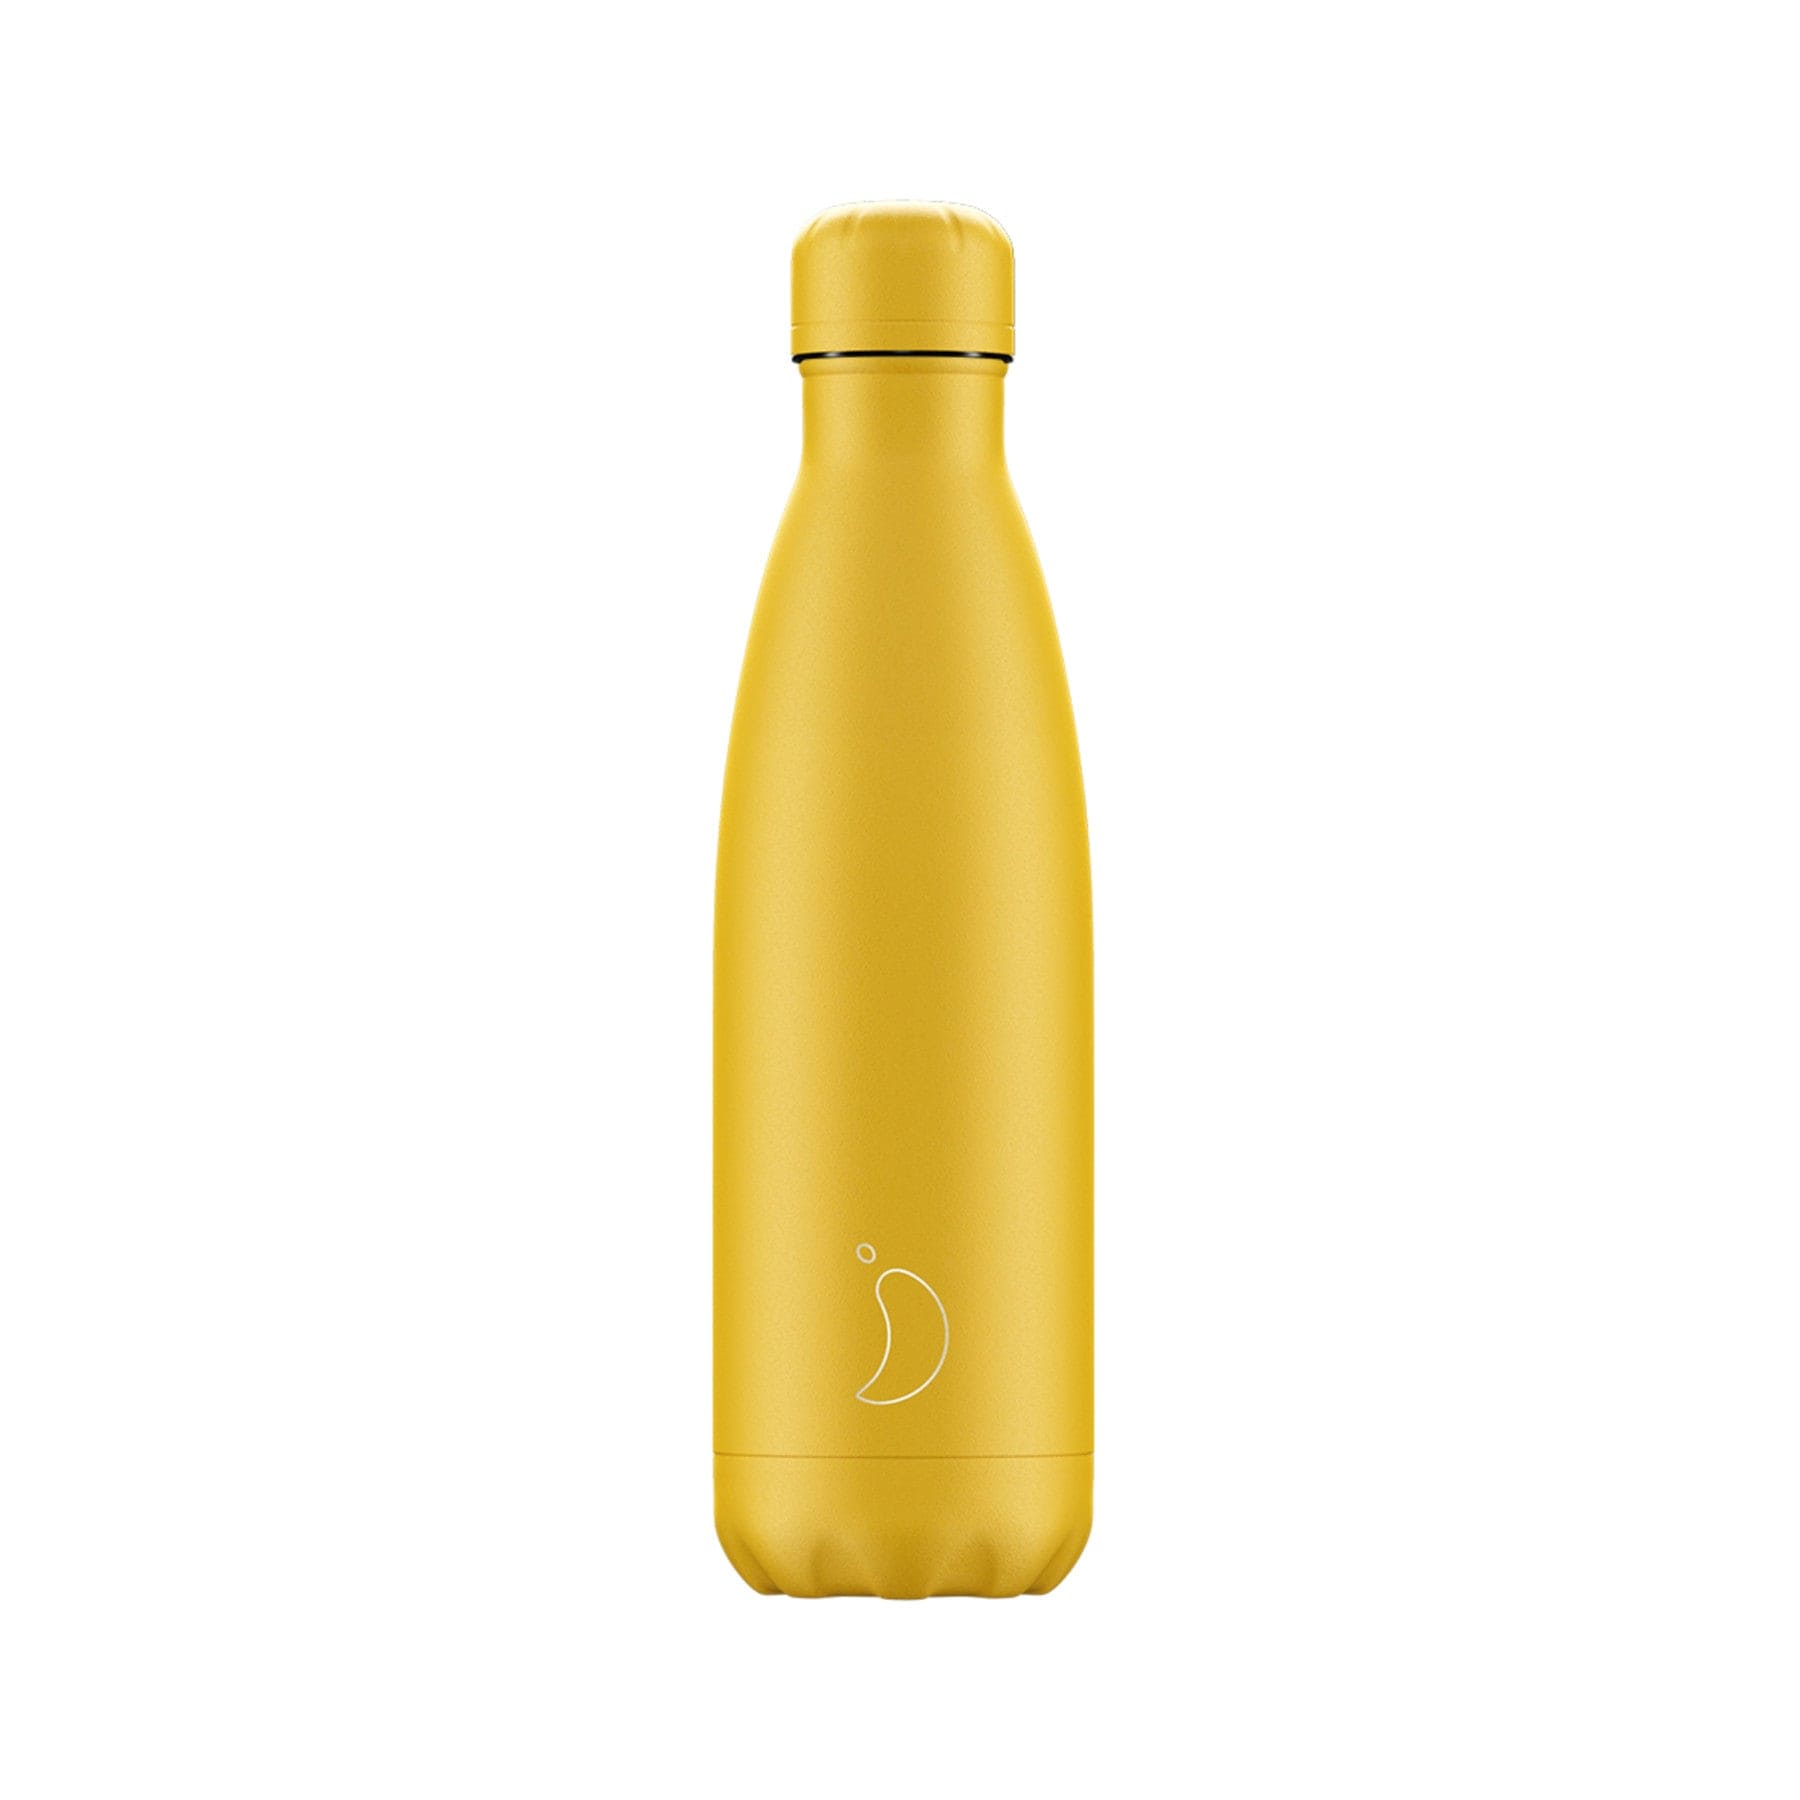 Yellow insulated stainless steel water bottle on a white background.